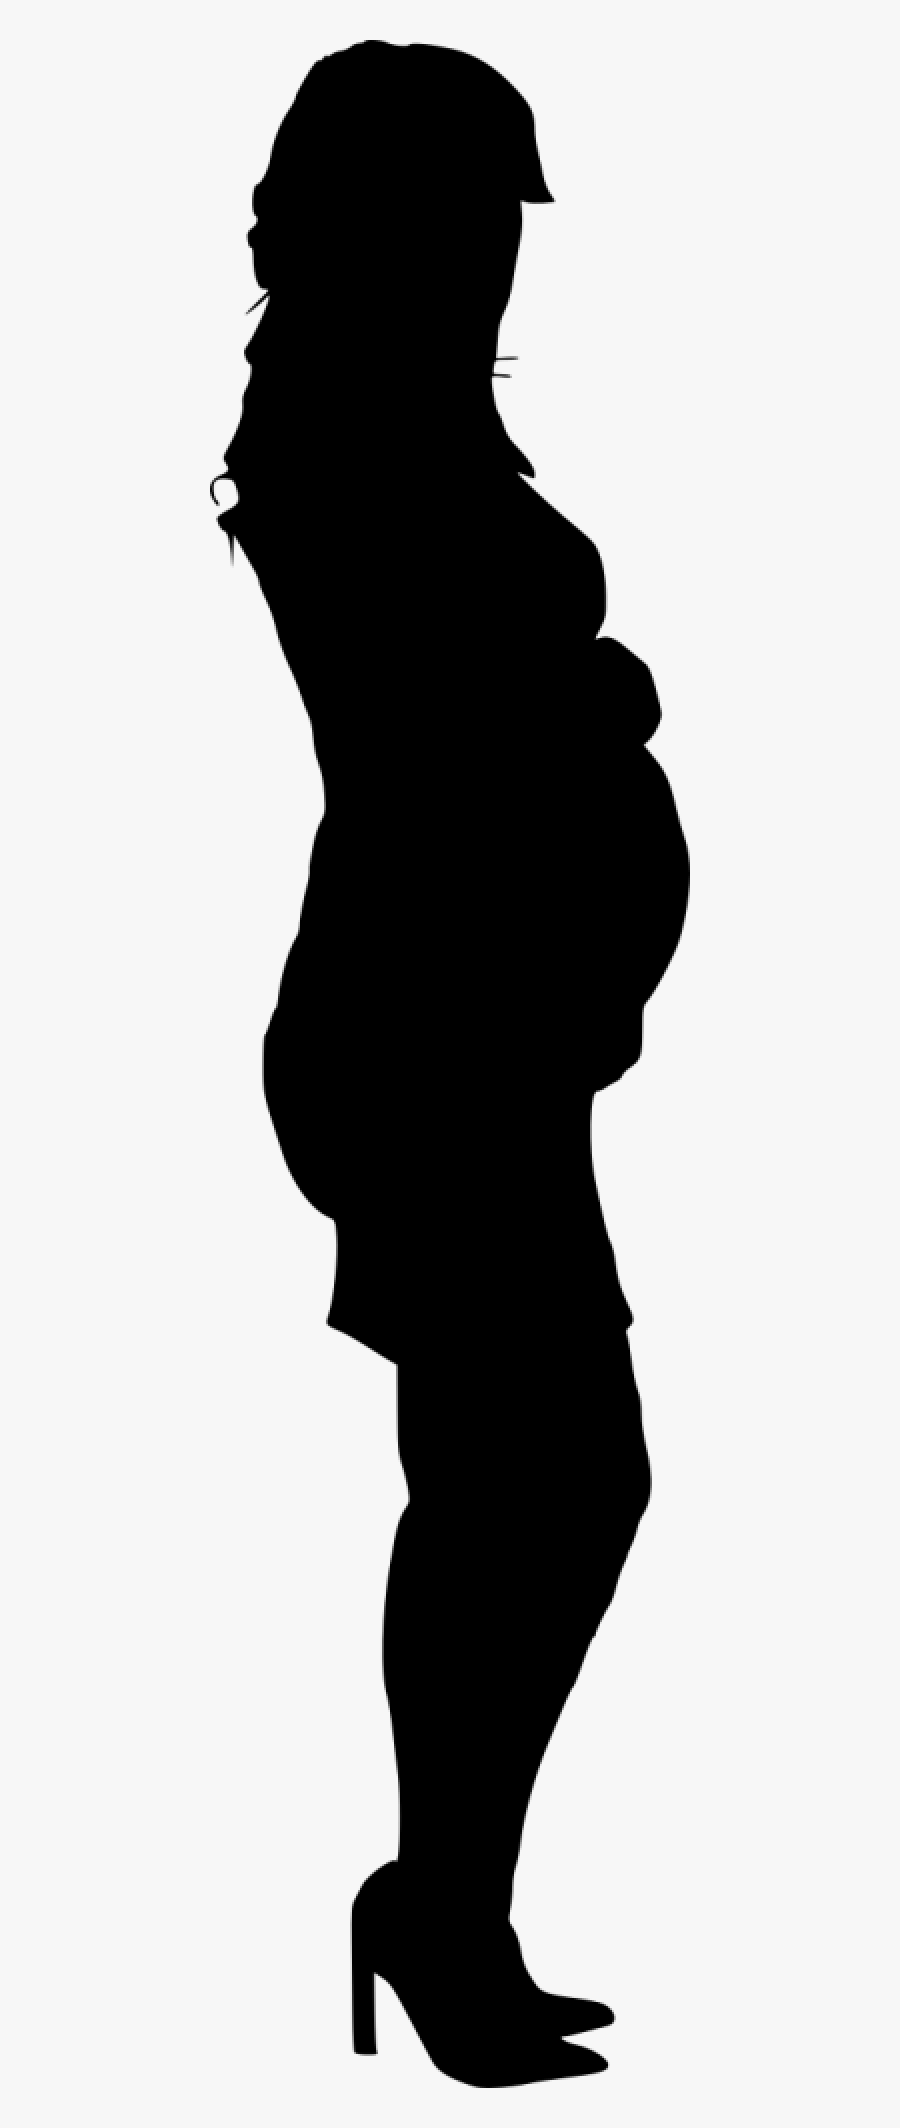 Pregnant Woman Silhouette Png - Girl Pregnant Silhouette, Transparent Clipart